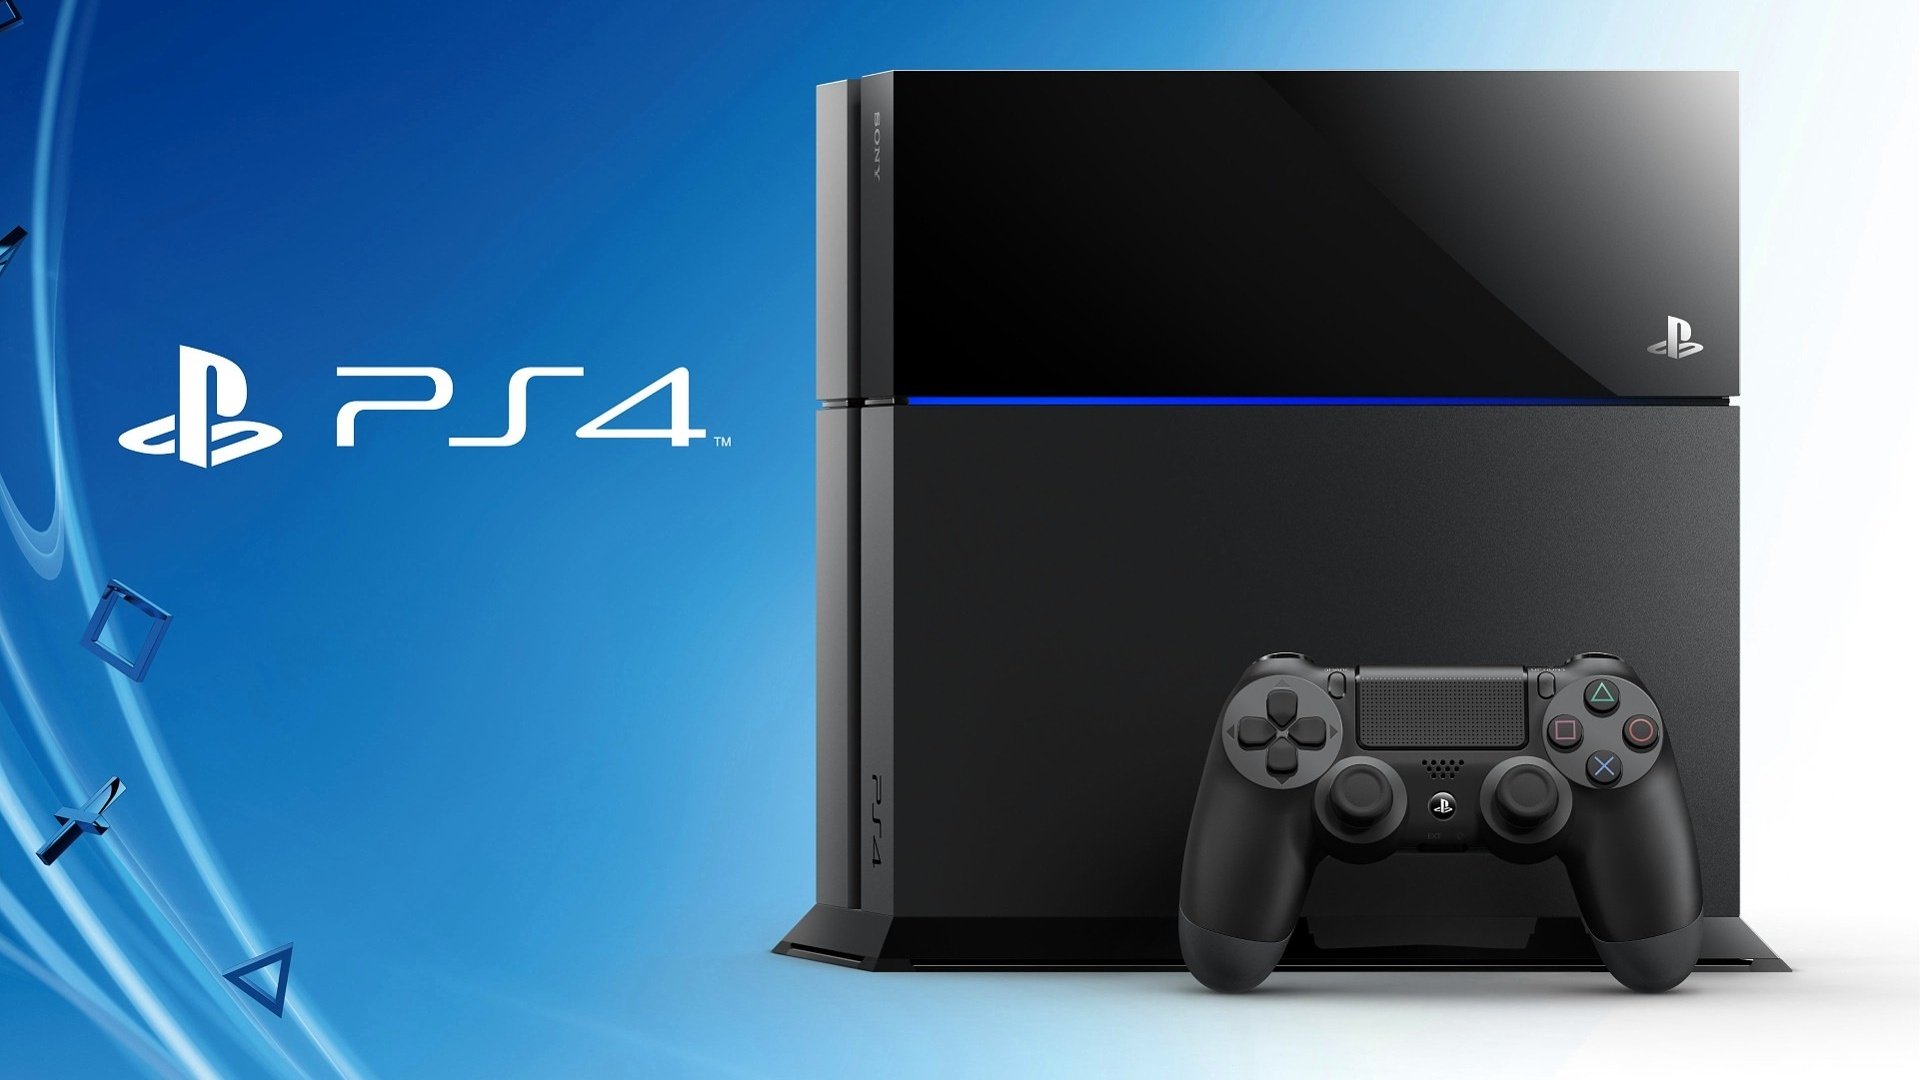 PS4 Home - The Home of PlayStation 4